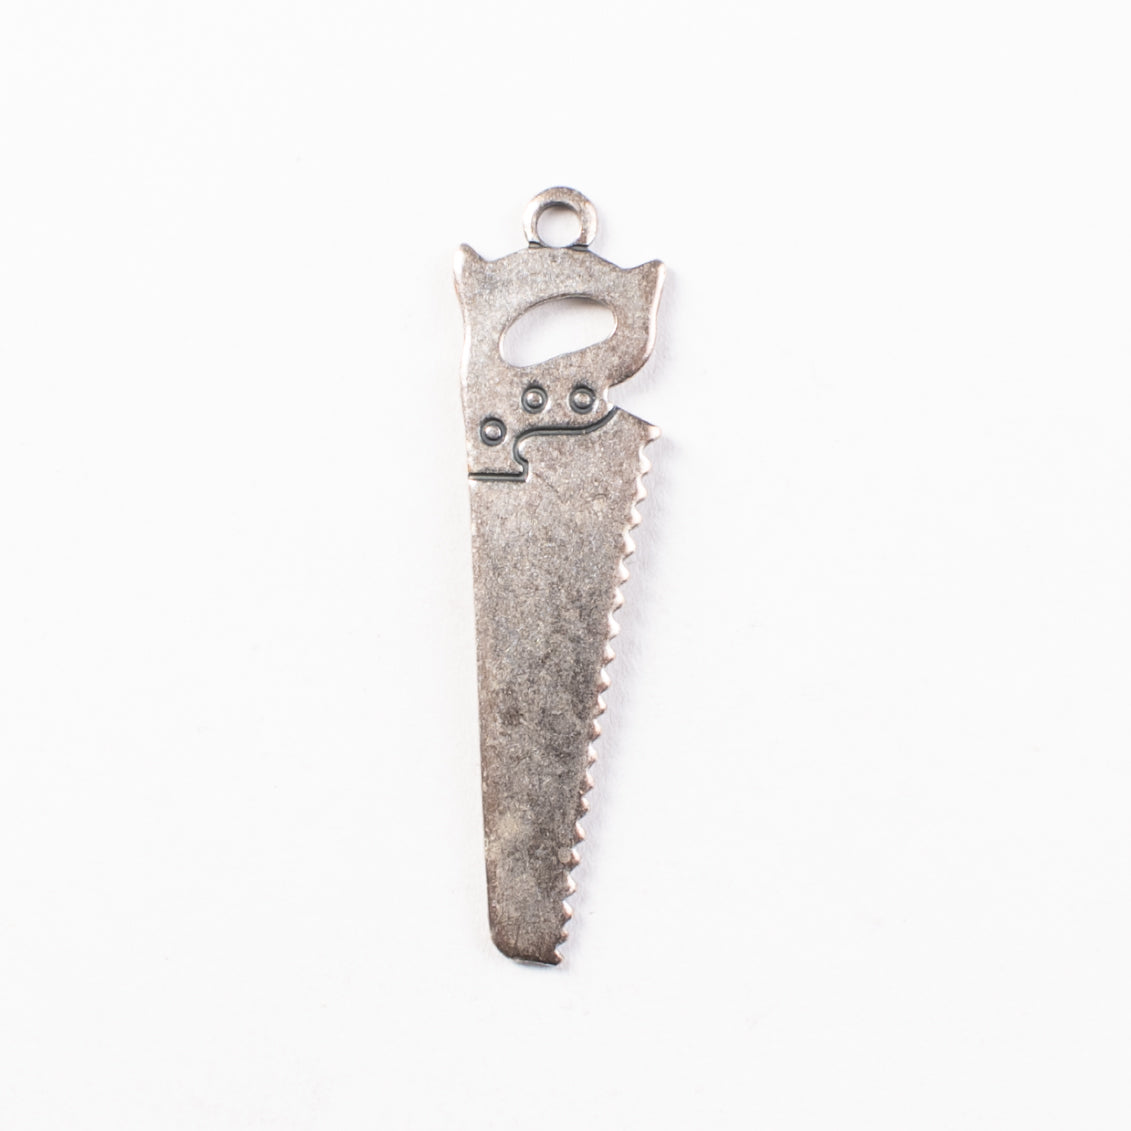 36mm Saw Tool Charm, Antique Gold, Classic Silver, pk/6